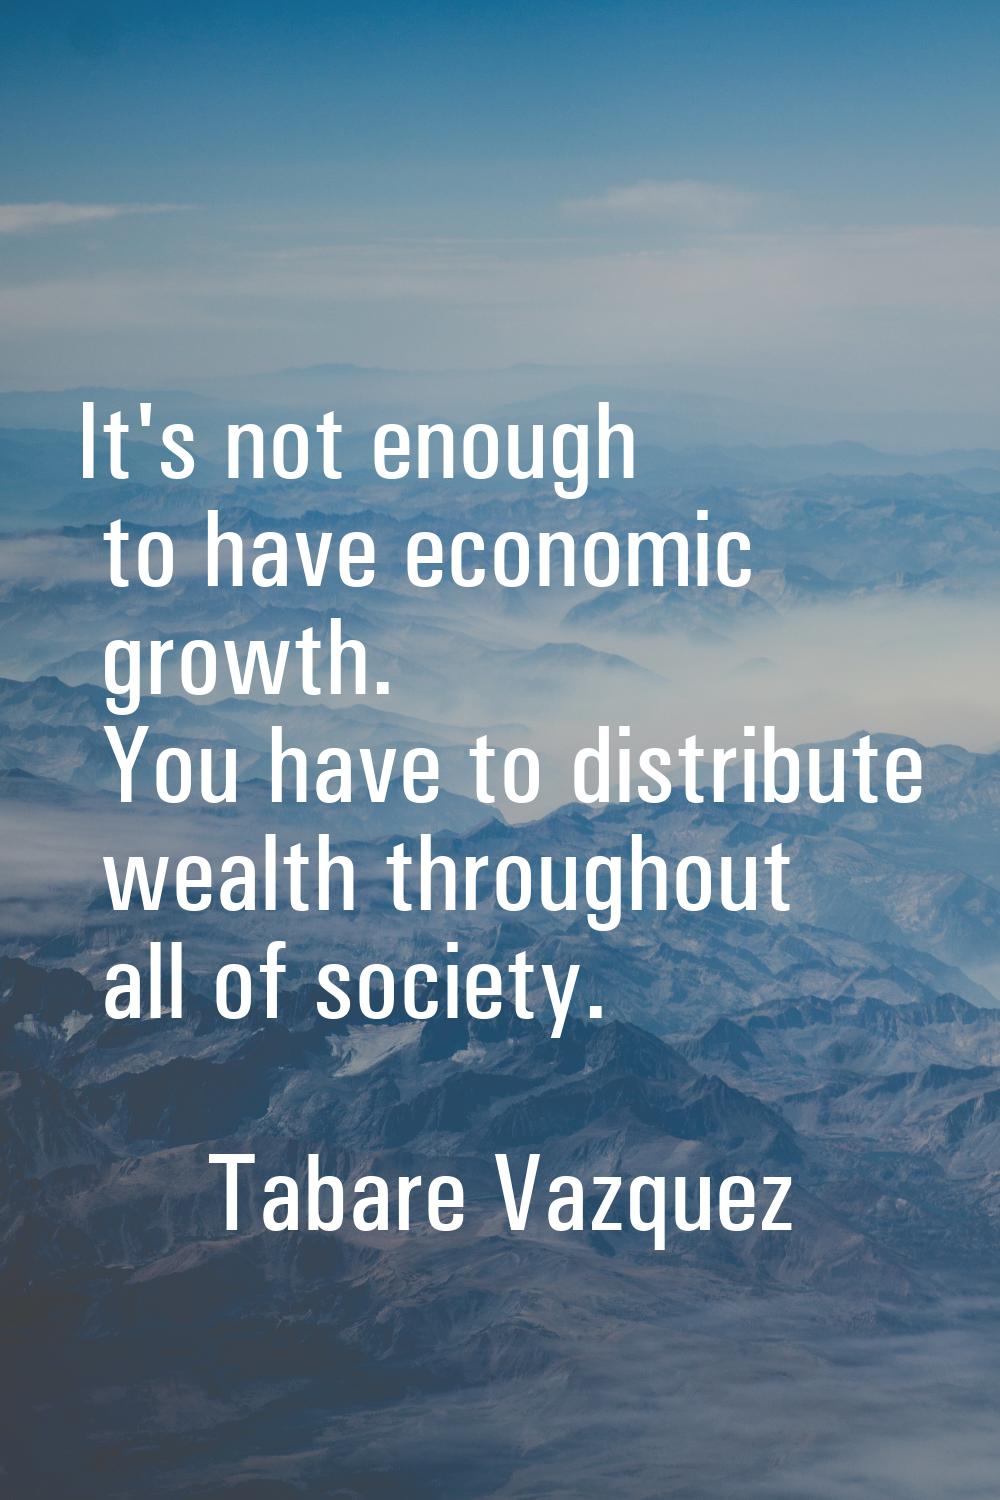 It's not enough to have economic growth. You have to distribute wealth throughout all of society.